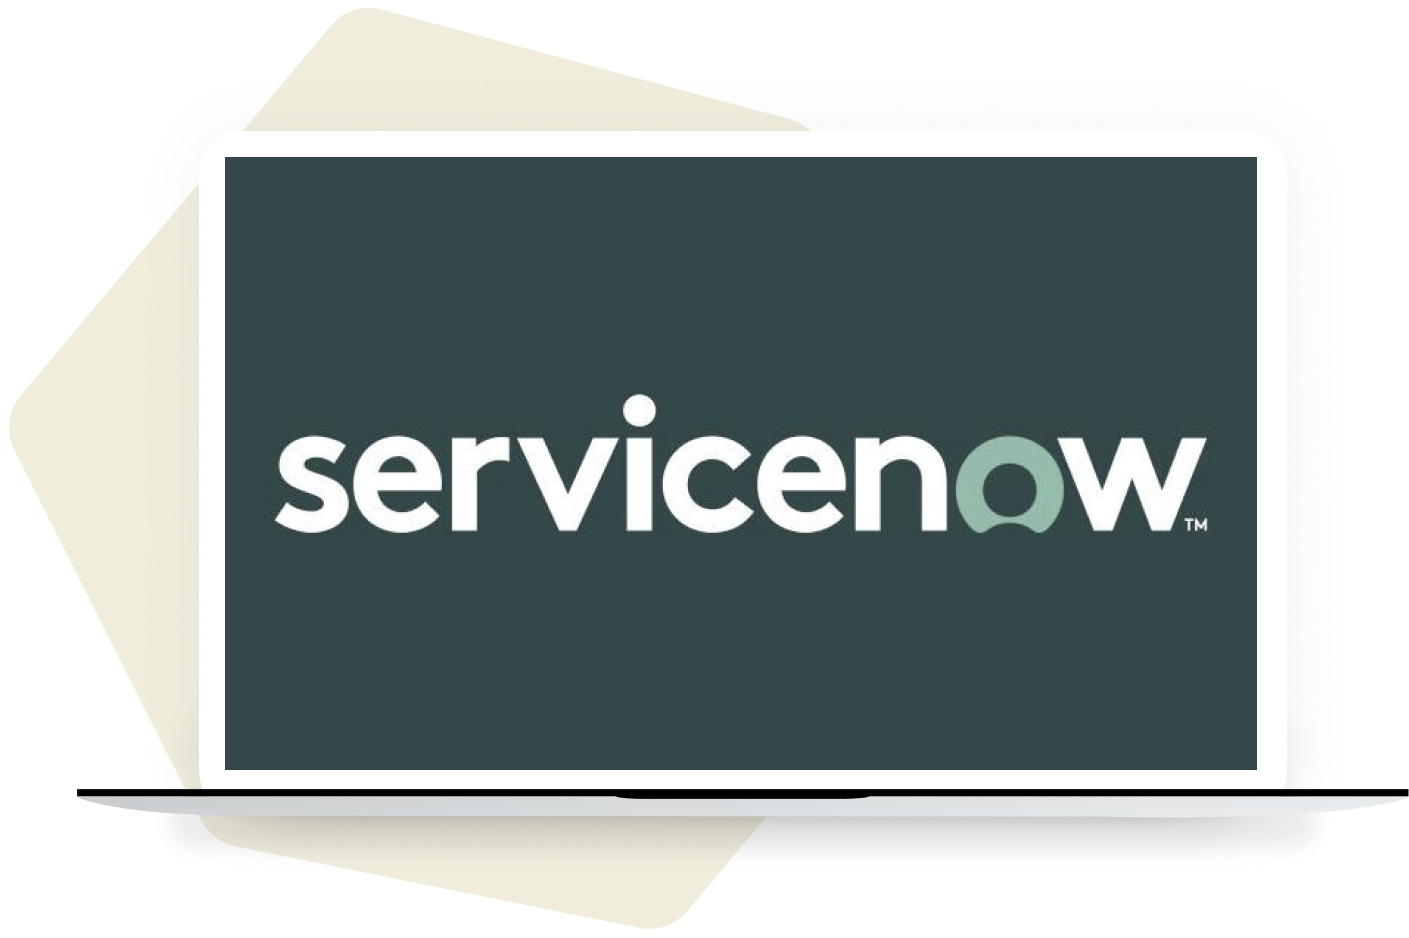 ServiceNow recruiting firm